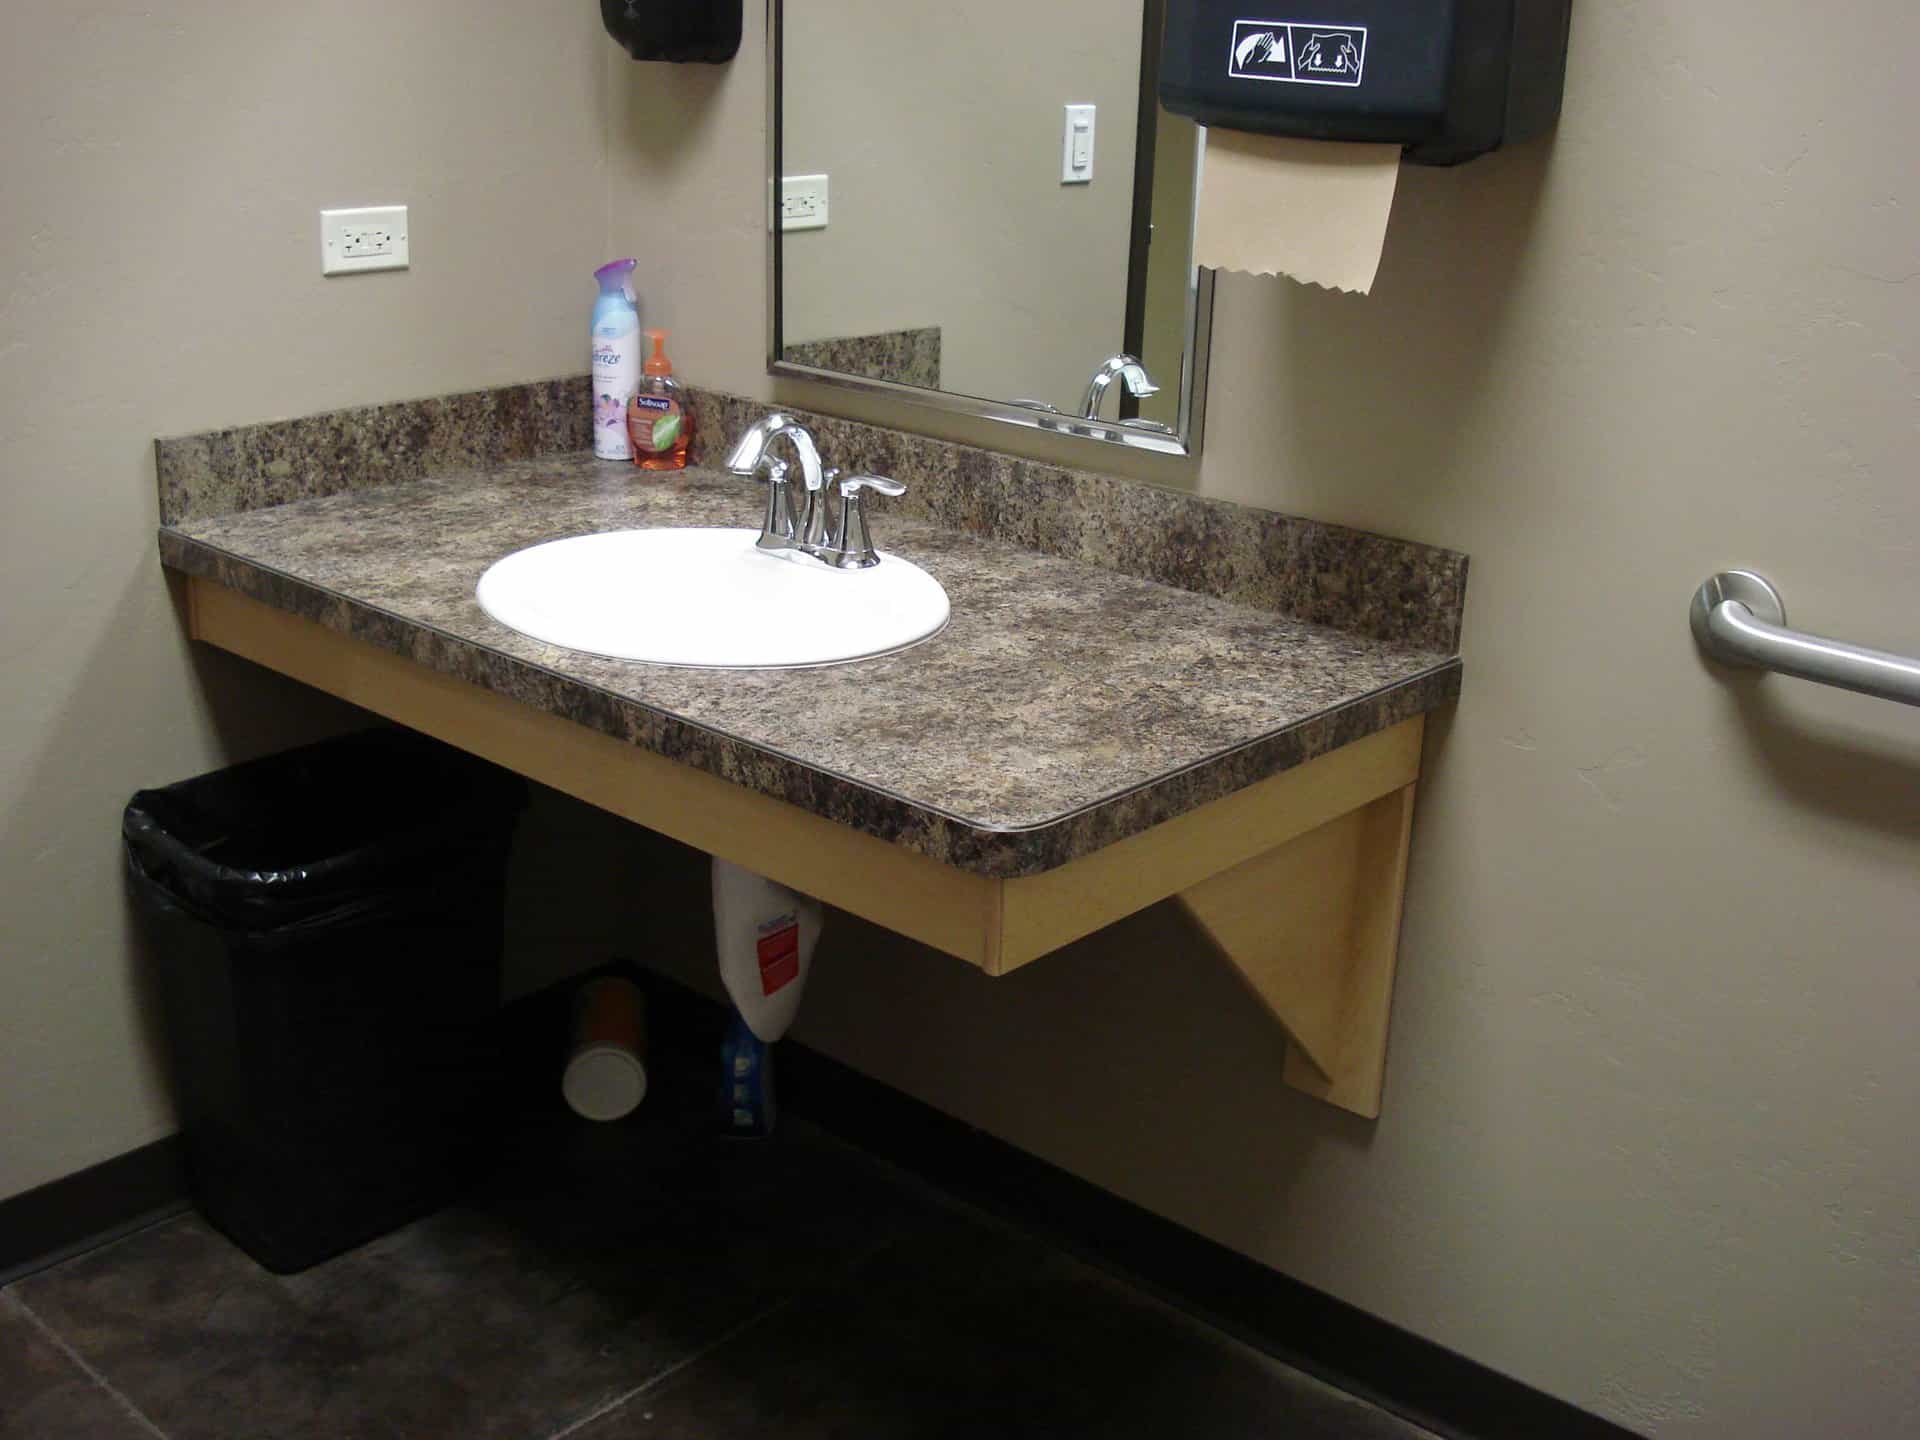 Laminate sink countertop in a commercial setting